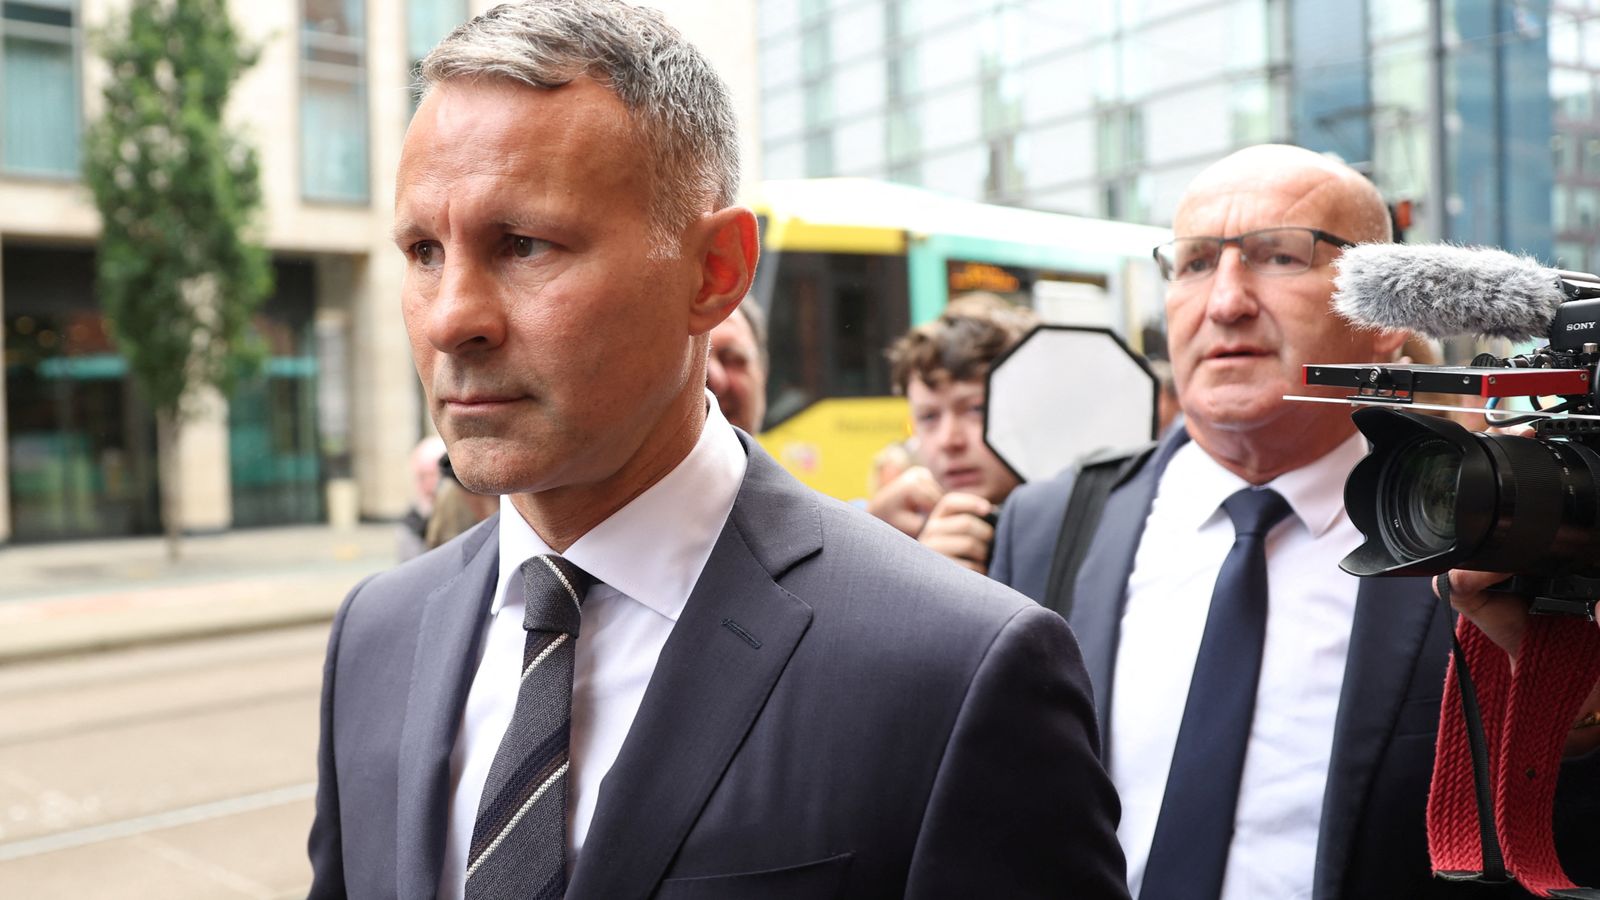 ryan-giggs-trial-live-former-manchester-united-star-accused-of-attacking-and-controlling-ex-girlfriend-kate-greville